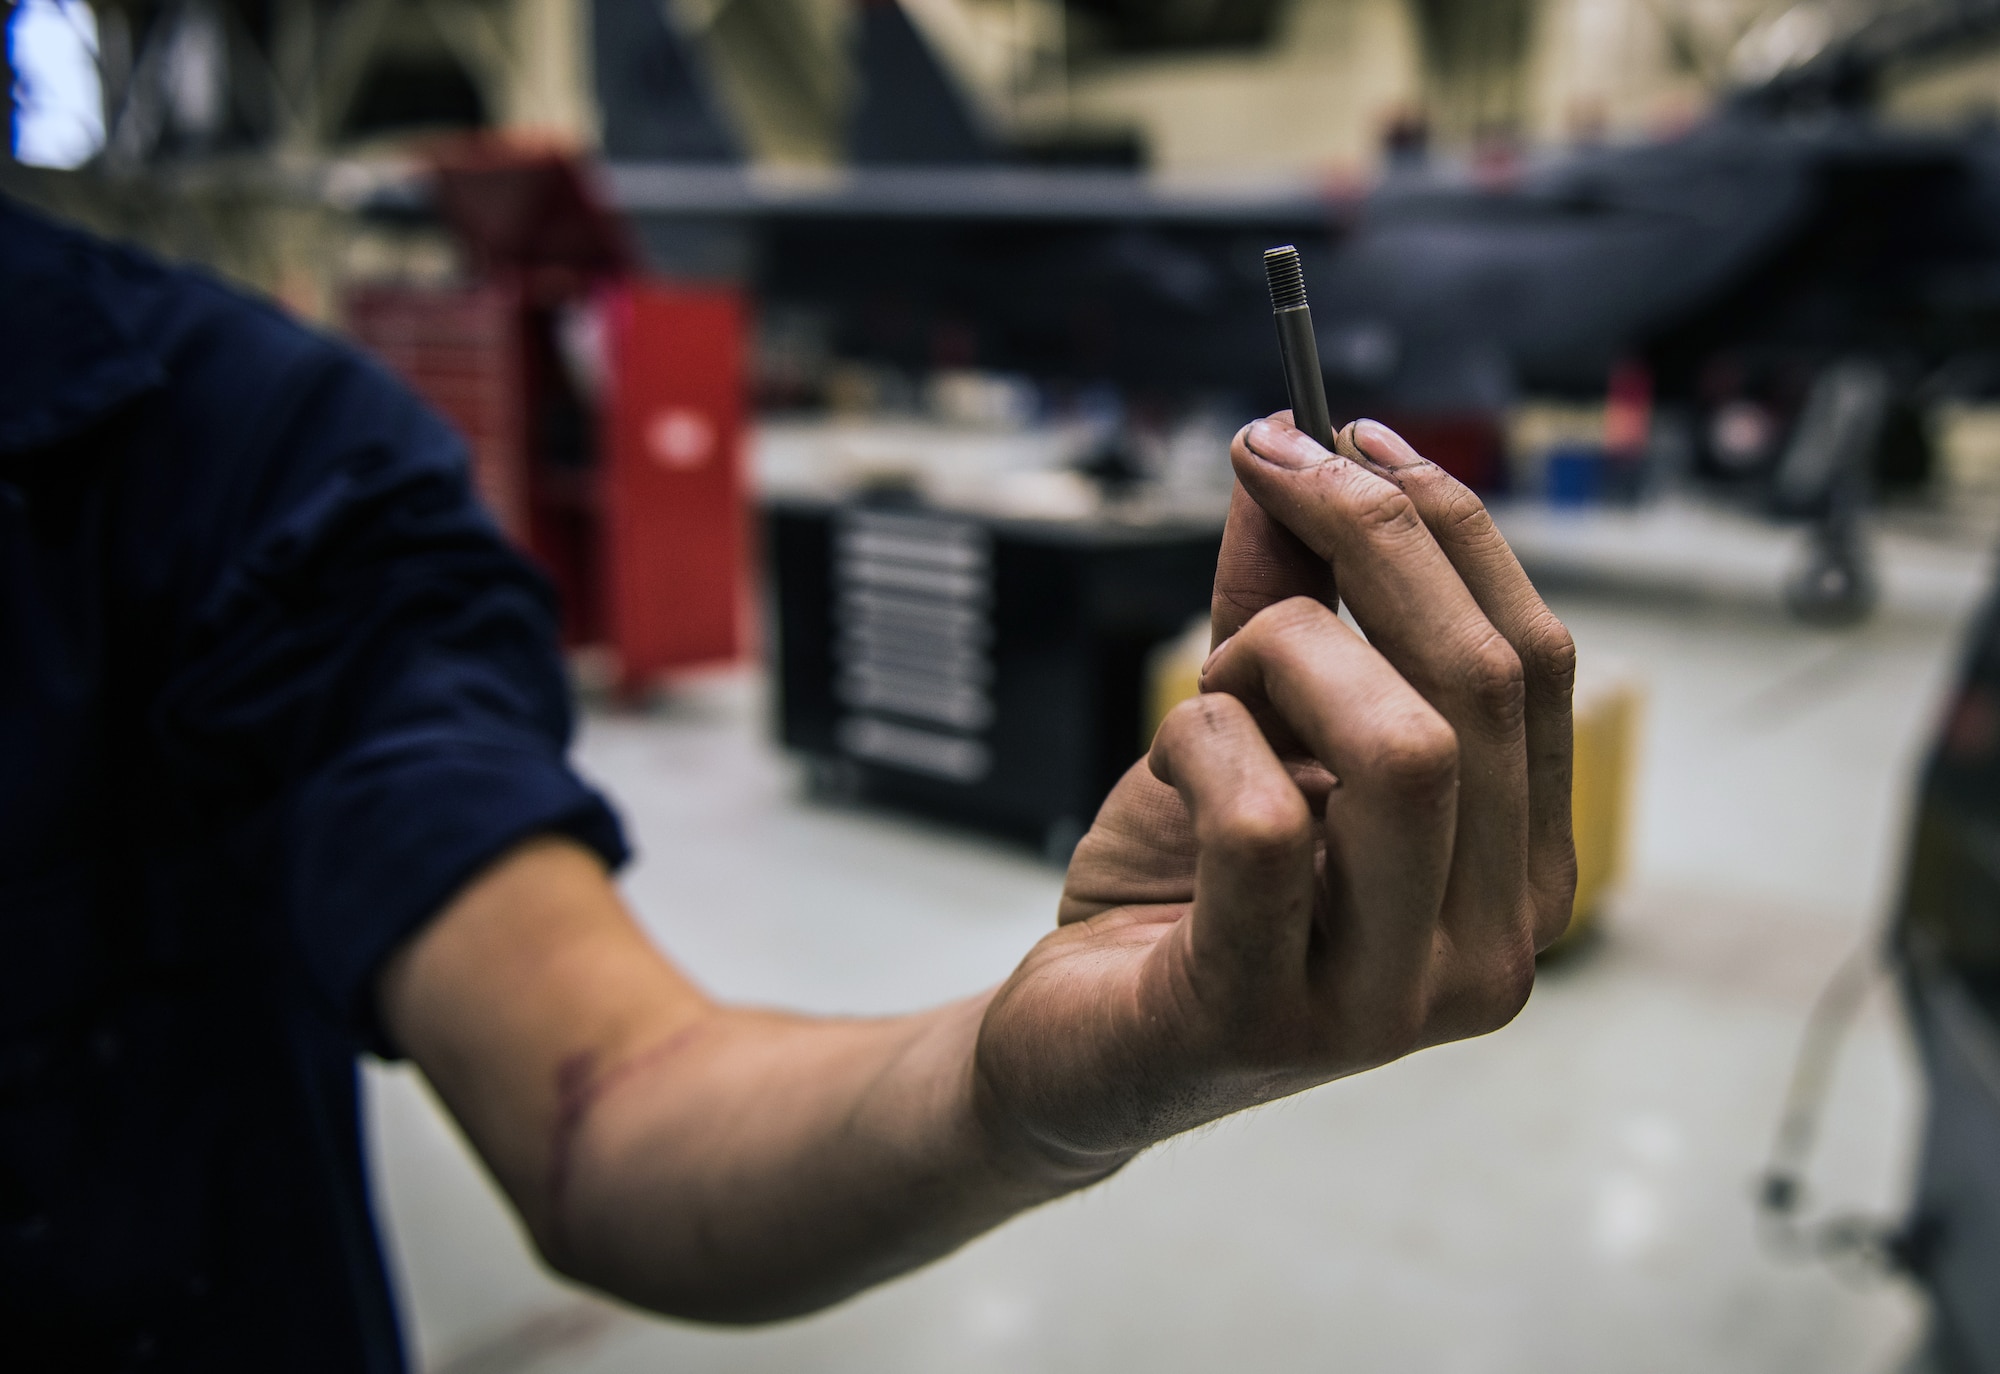 Airman 1st Class Saul Vasquez, 366th Equipment Maintenance Squadron phase inspection team member, holds an example of the bolt that tore his radial artery at Mountain Home Air Force Base, Idaho. The incident inspired new initiatives to supply trauma kits across the base. (U.S. Air Force photo by Airman 1st Class Connor J. Marth)